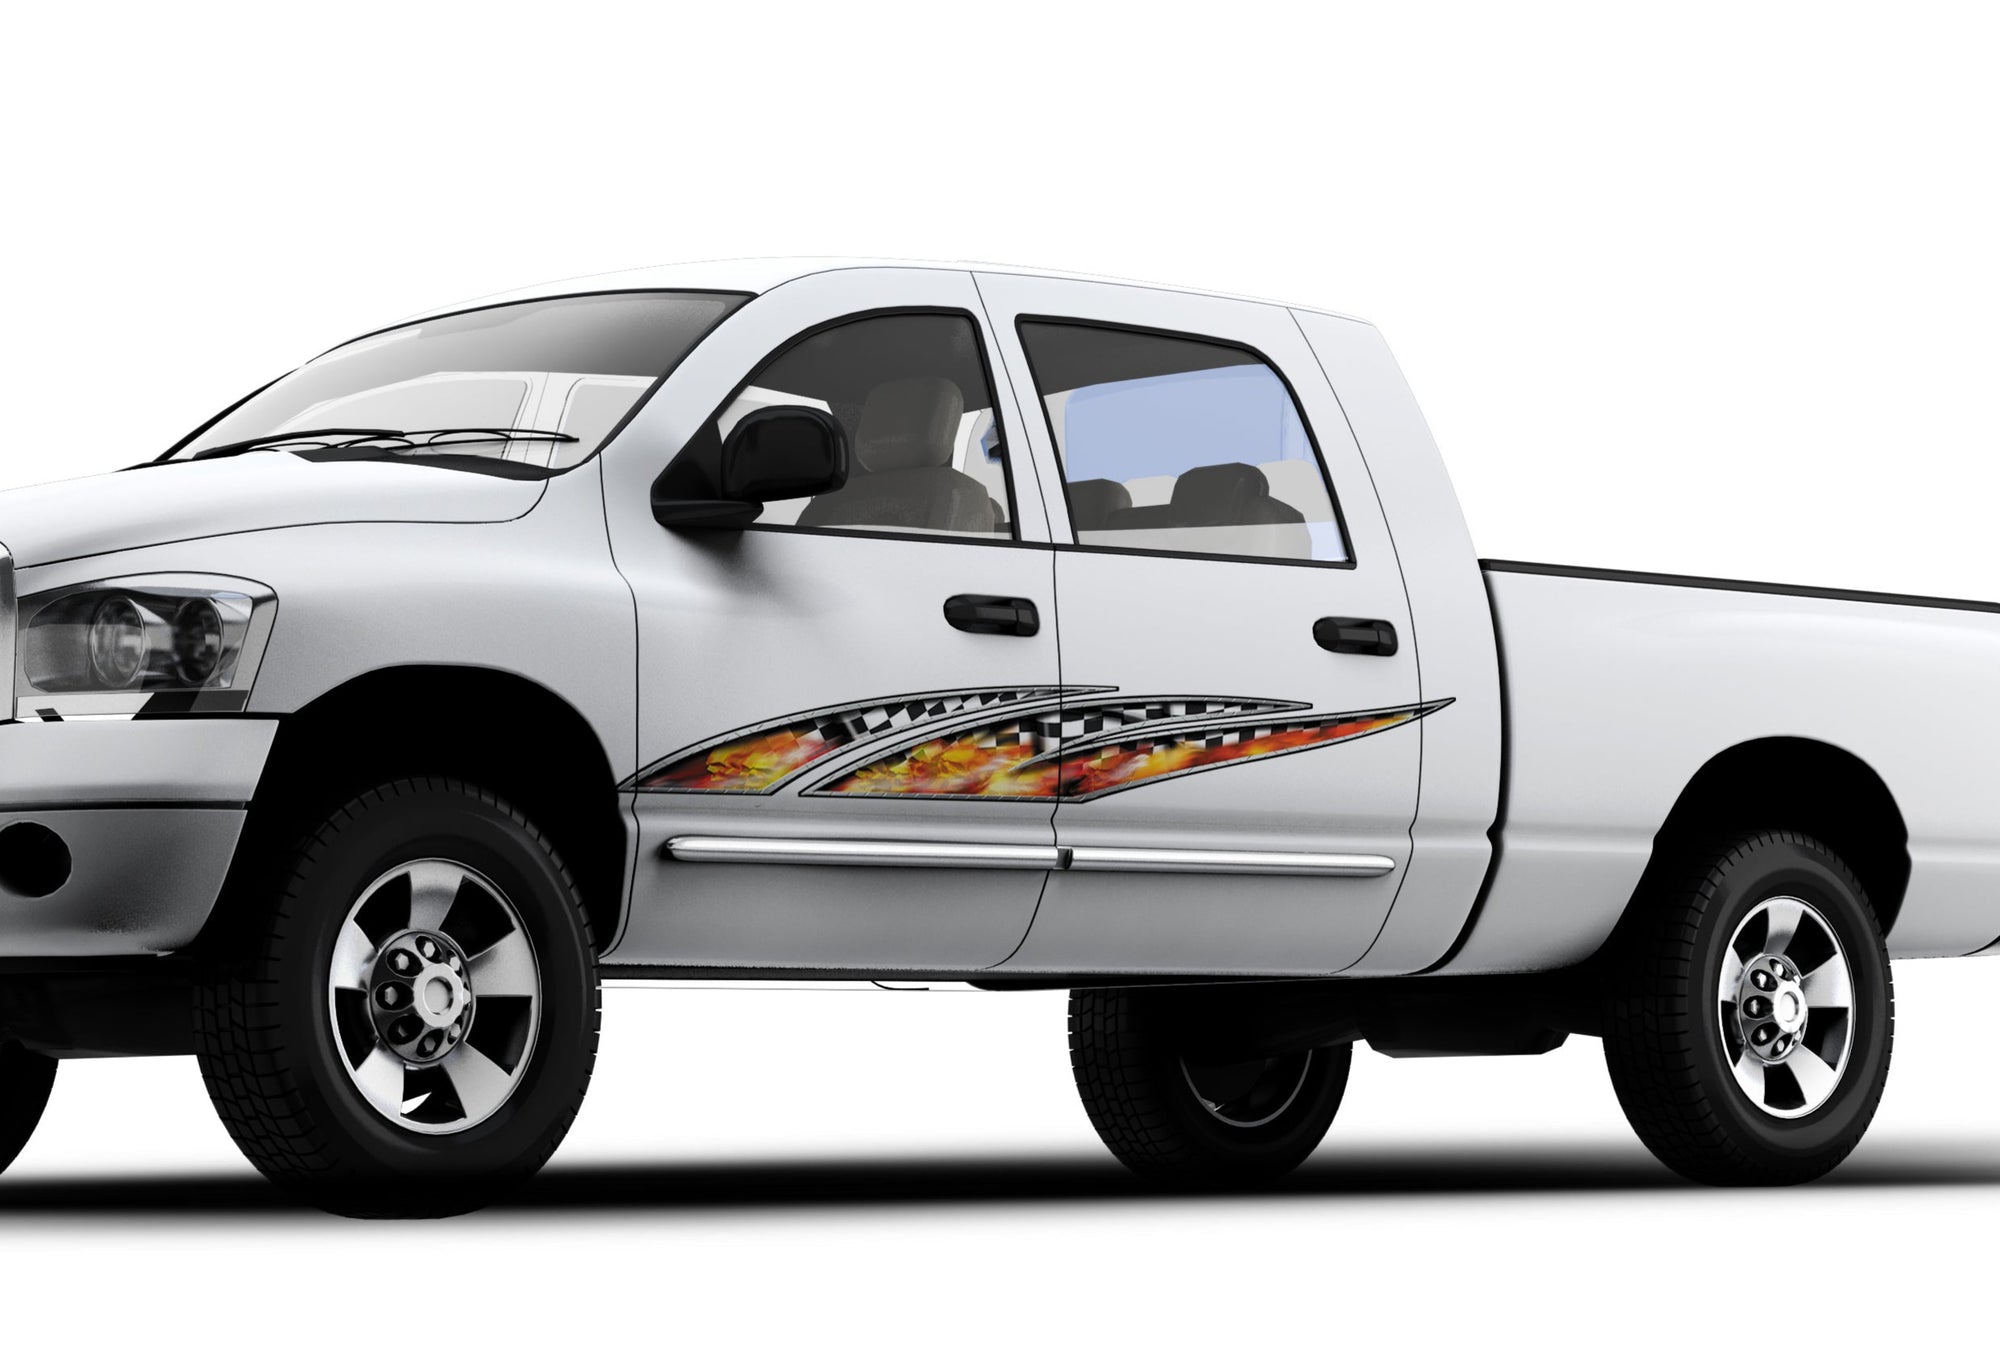 fire skull checkers wave vinyl decal on the side of white pickup truck